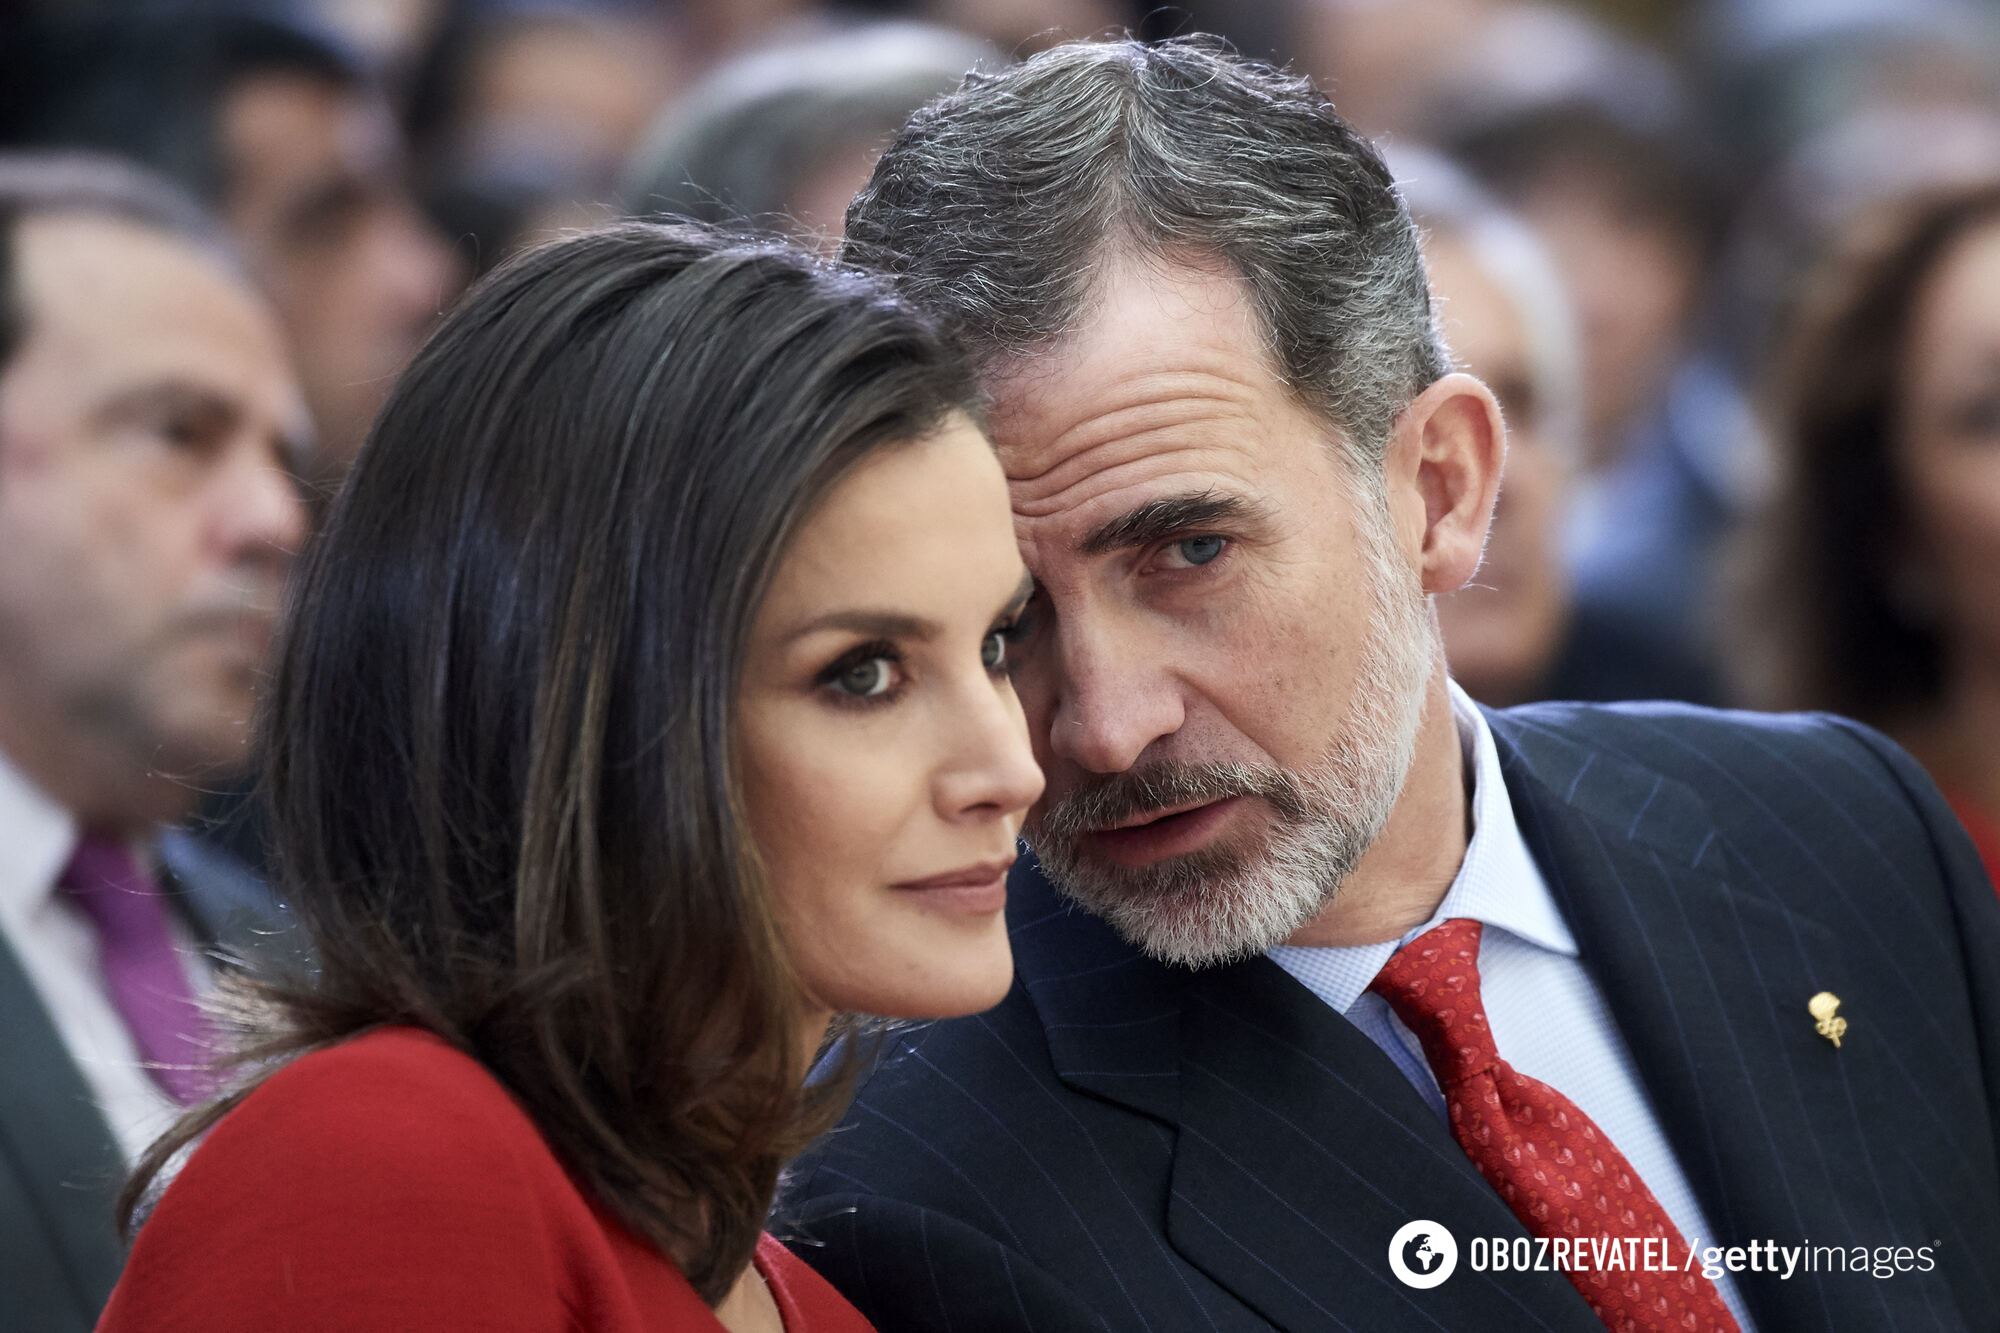 Did Queen Letizia have an affair with her son-in-law? A high-profile scandal has erupted in Spain, with ''selfie proof'' hitting the media